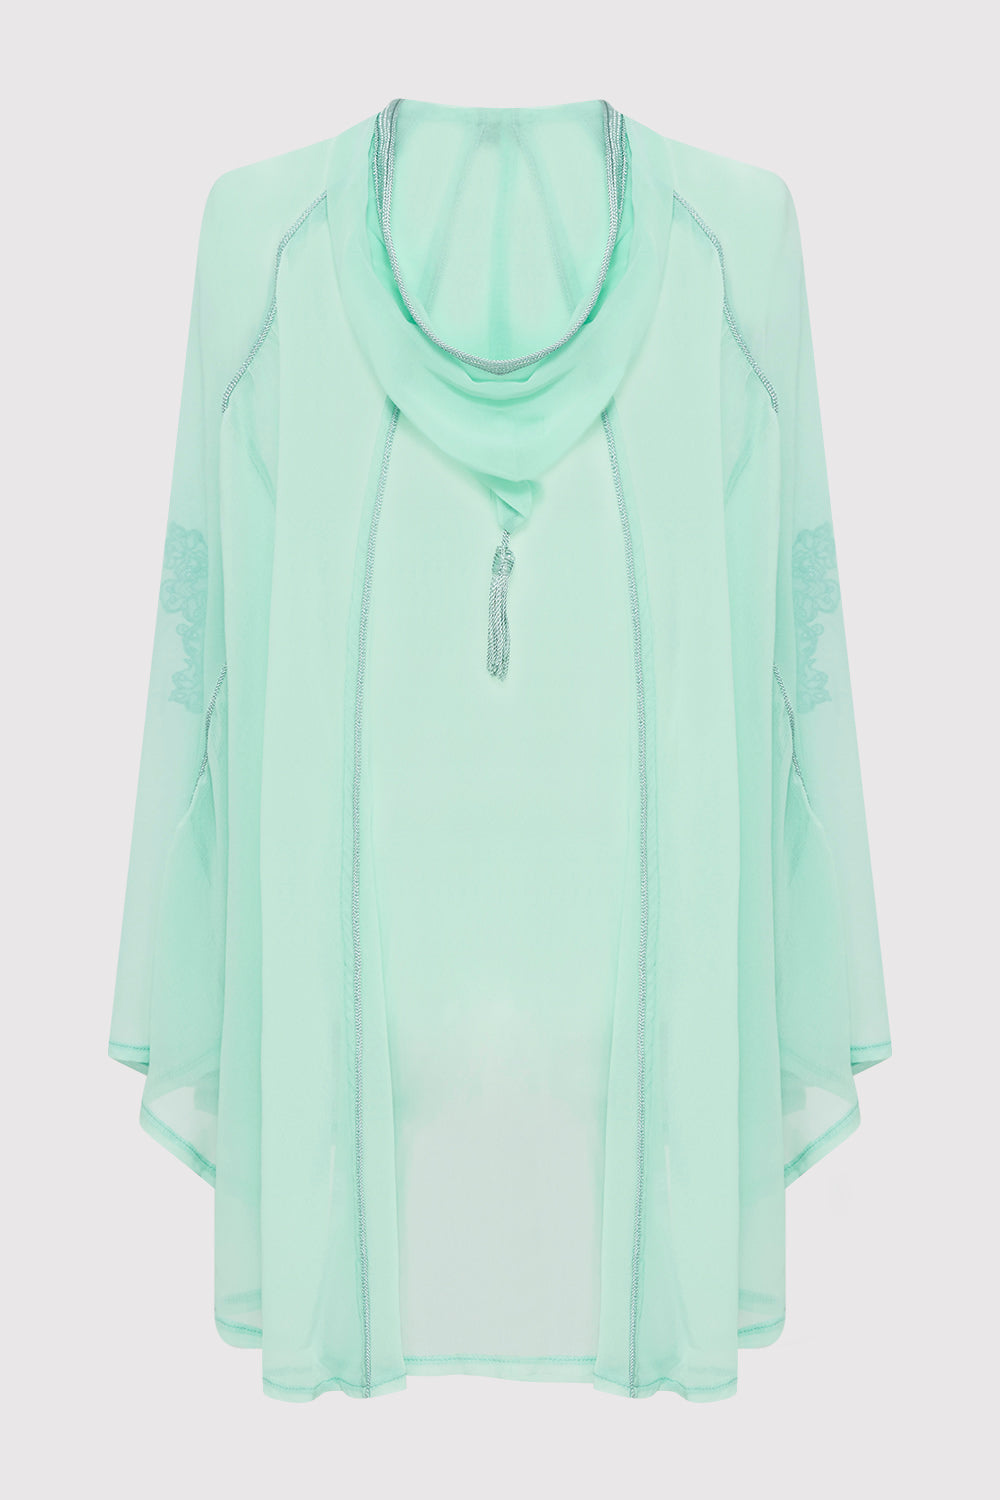 Razal Hooded Girl's Embroidered Lightweight Hooded Single Fasten Cape in Mint Green (2-12yrs)